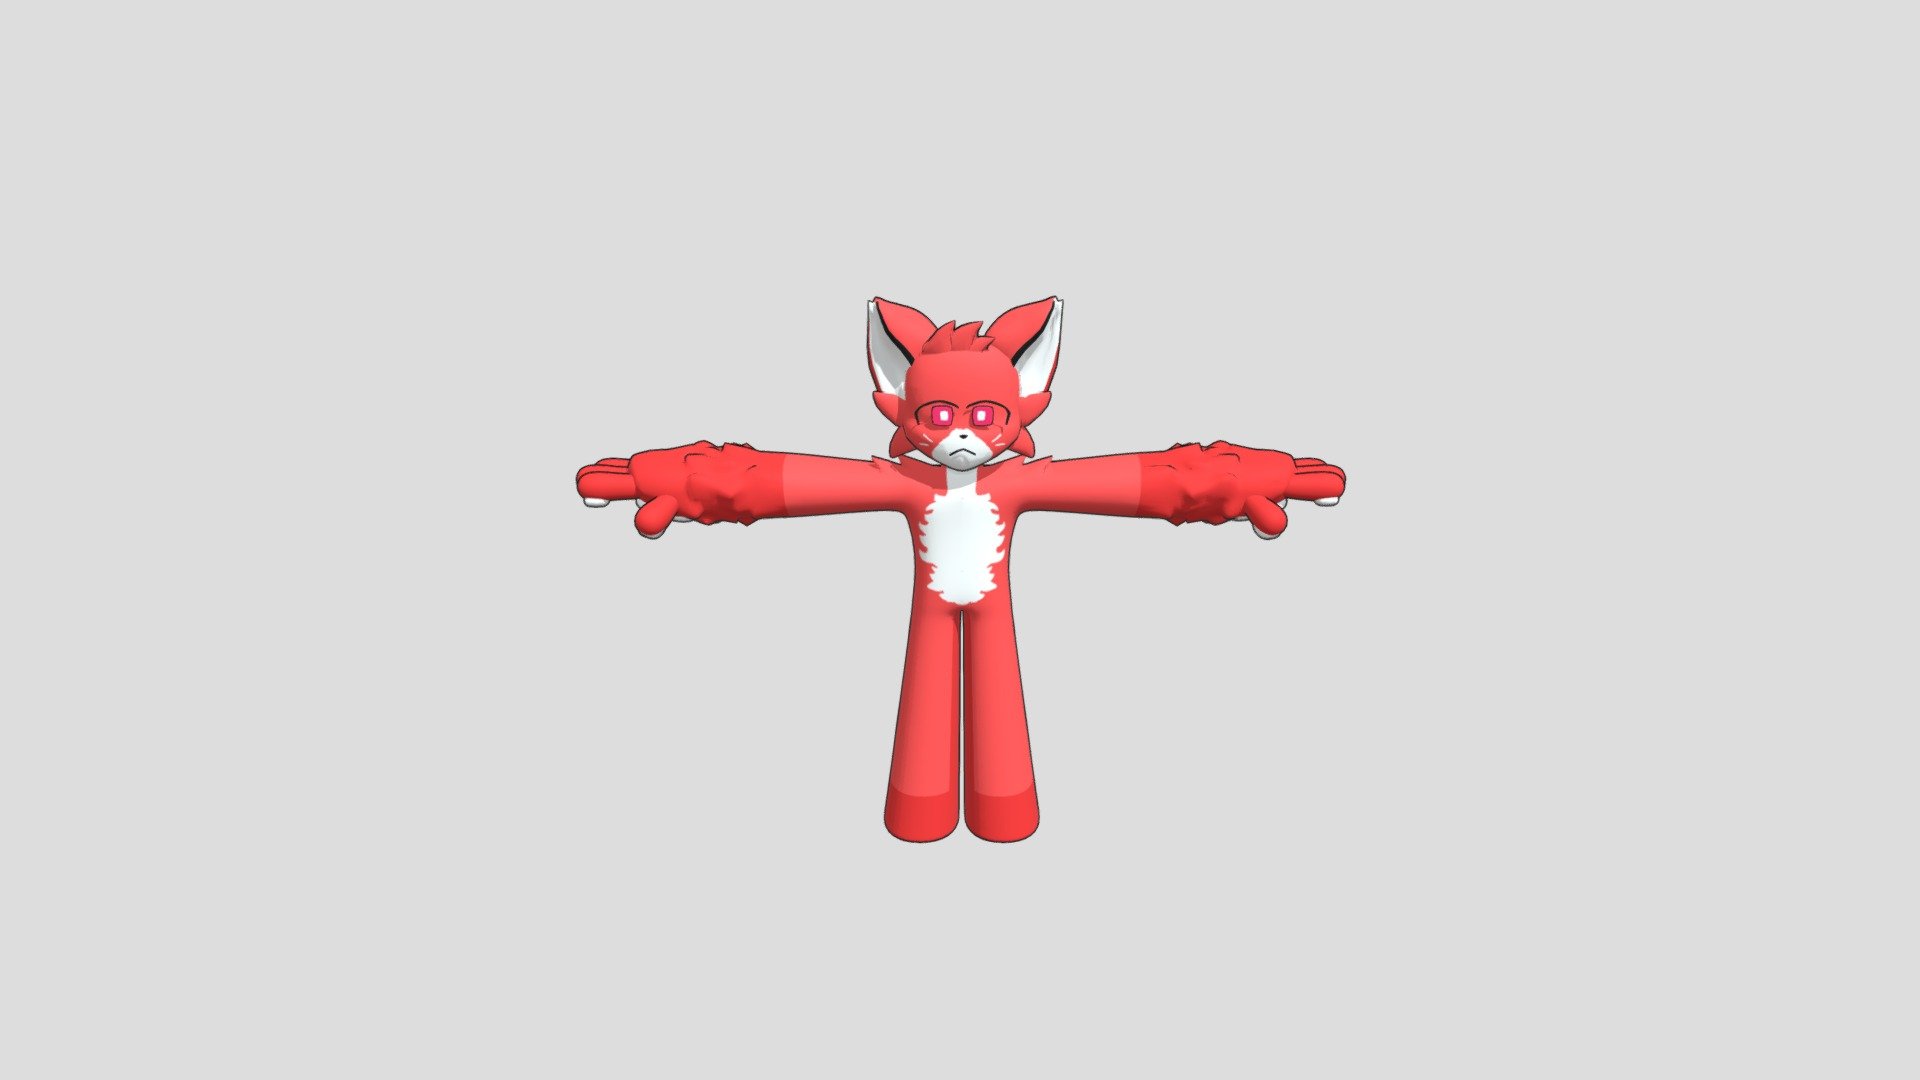 Hazzy from kaiju paradise on roblox  dm me on discord if your interested in buying, my discord is: + • Wolfi • +#2626 - hazzy ( read description ! ) - 3D model by Wolfi3D. 3d model